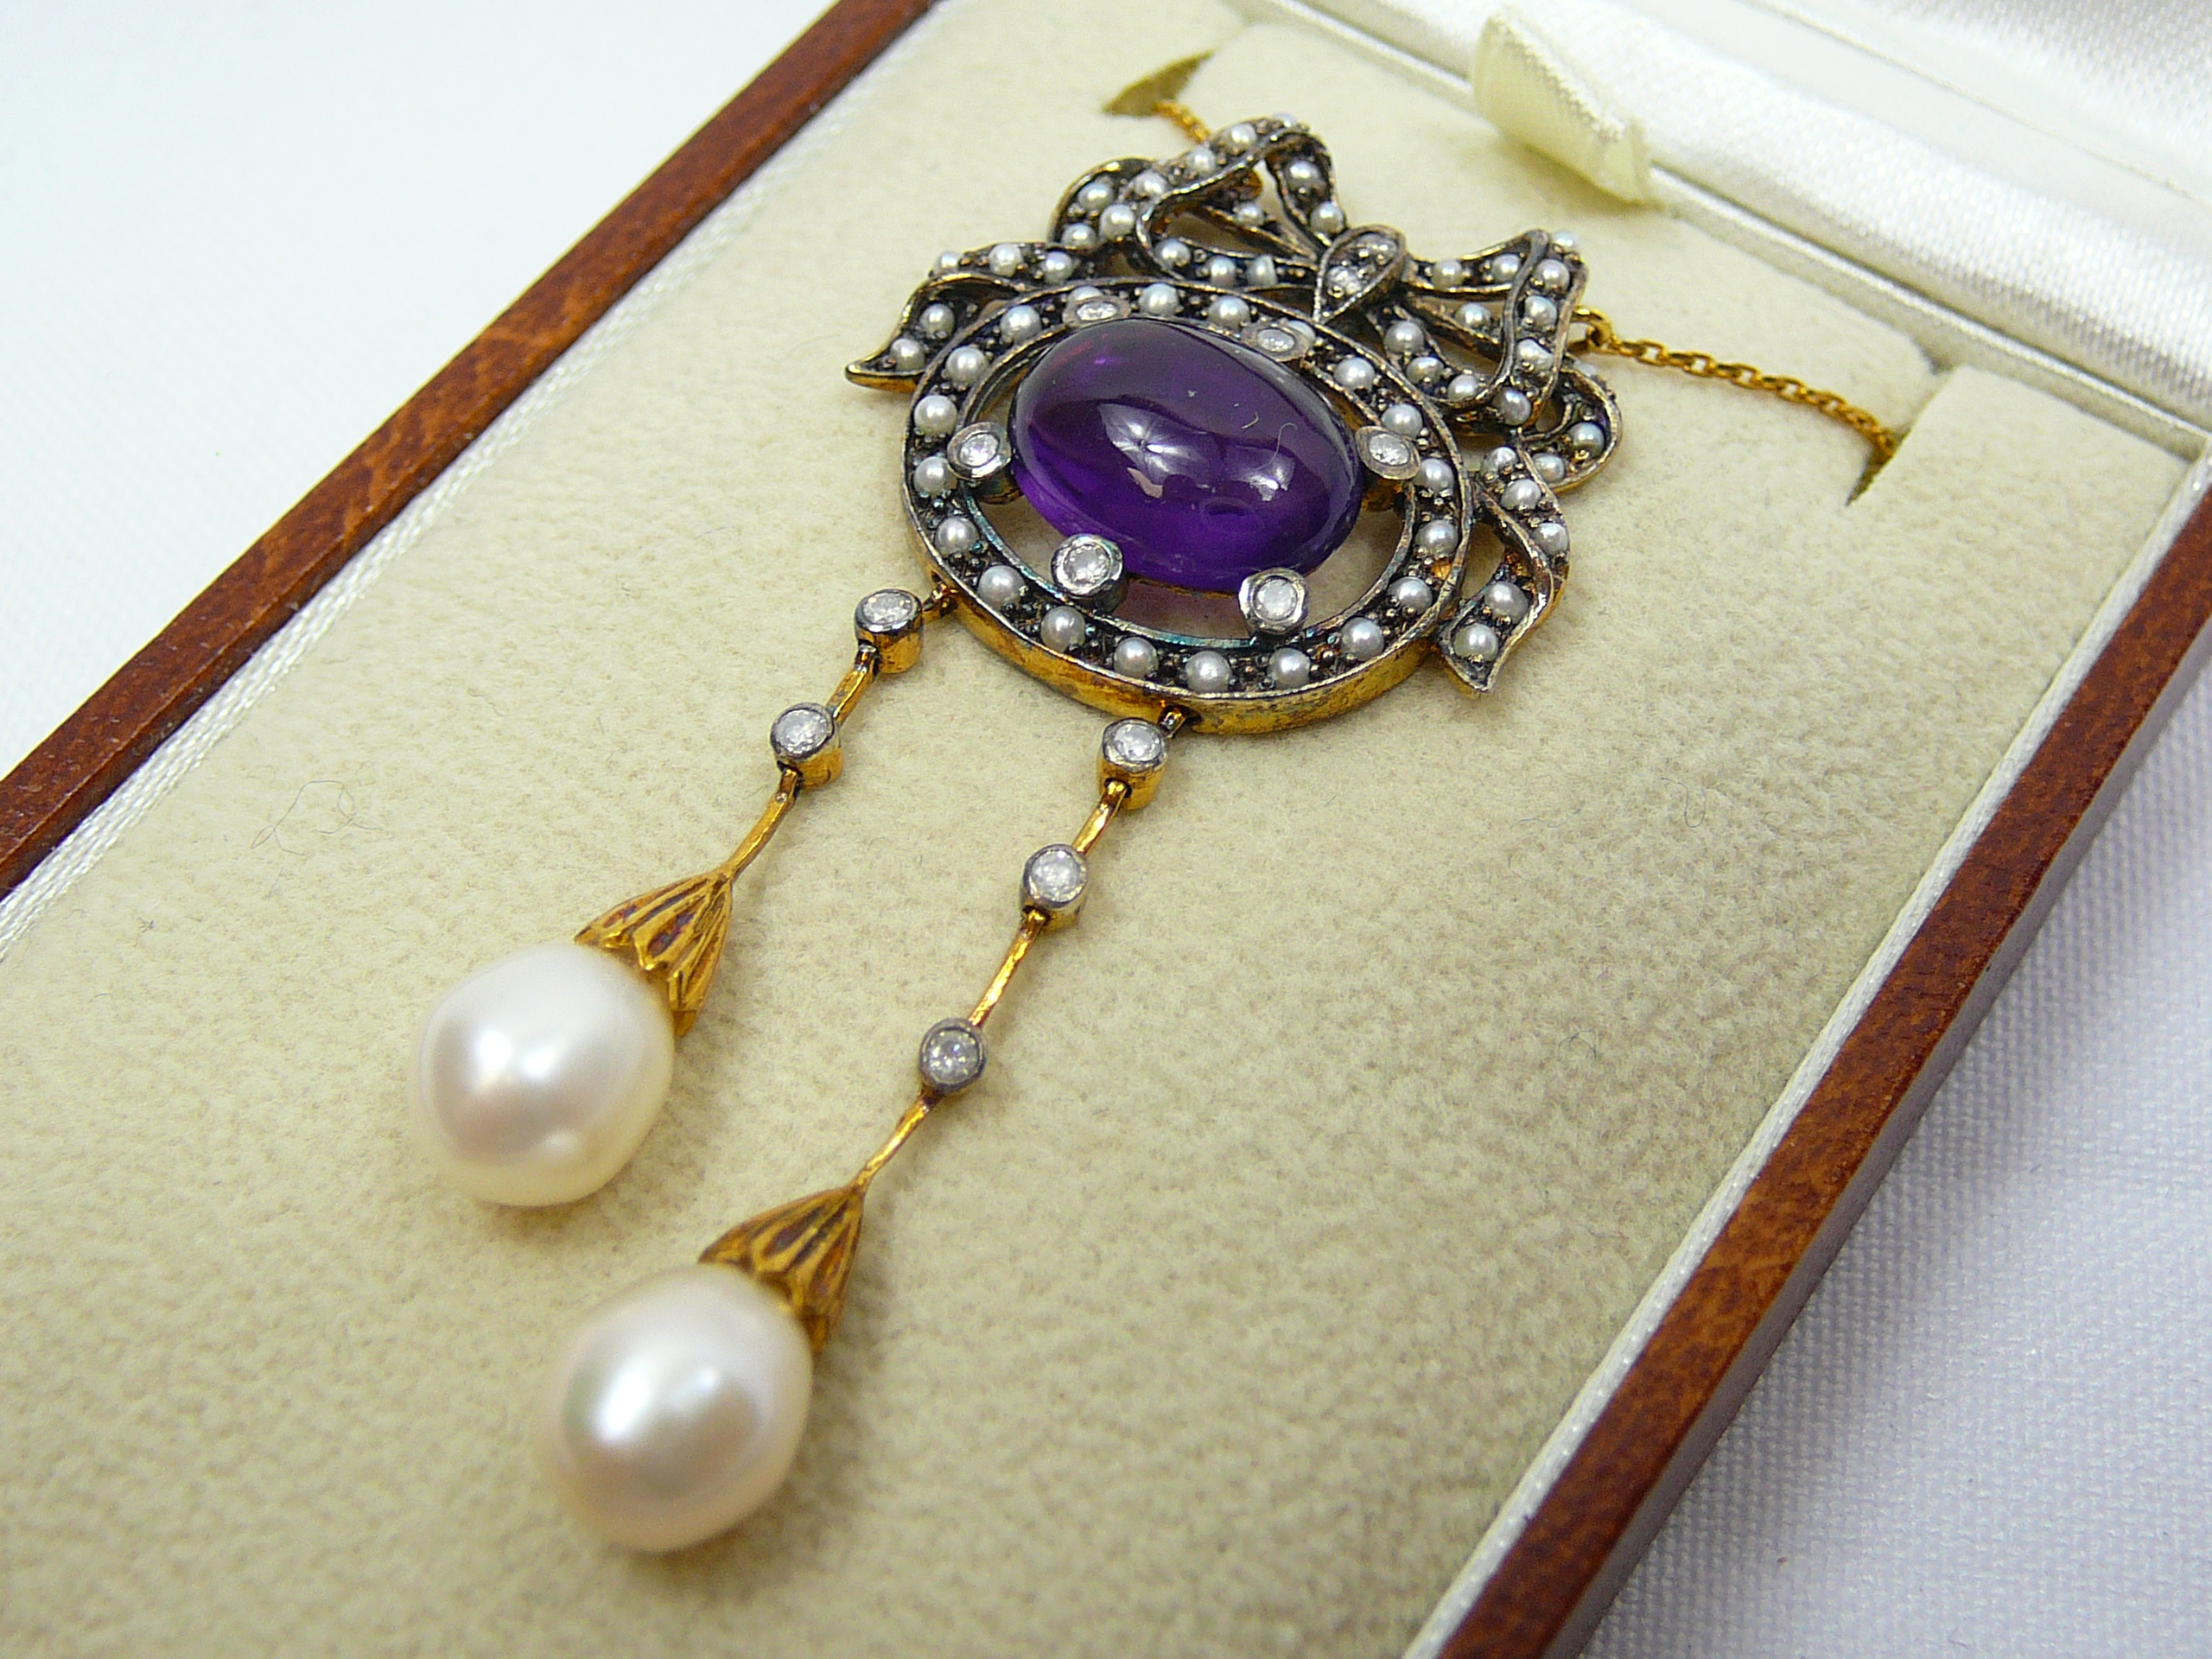 Gold and silver amethyst, pearl and diamond necklace